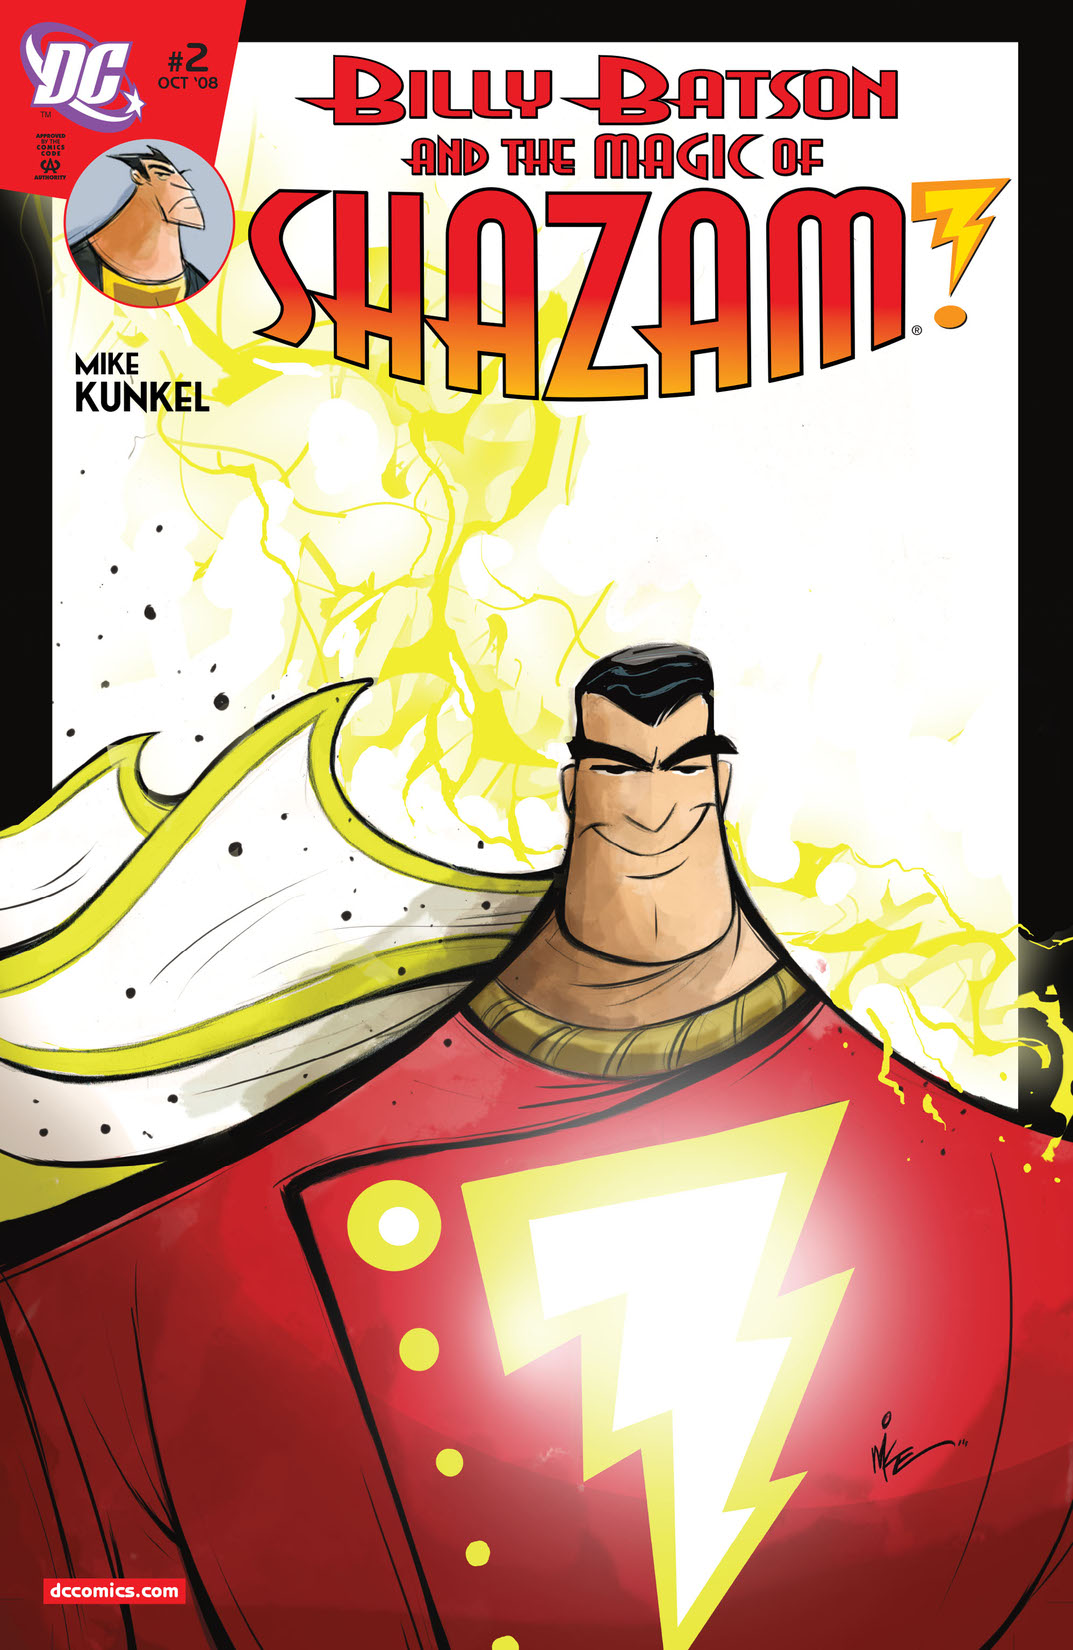 Billy Batson & the Magic of Shazam! #2 preview images